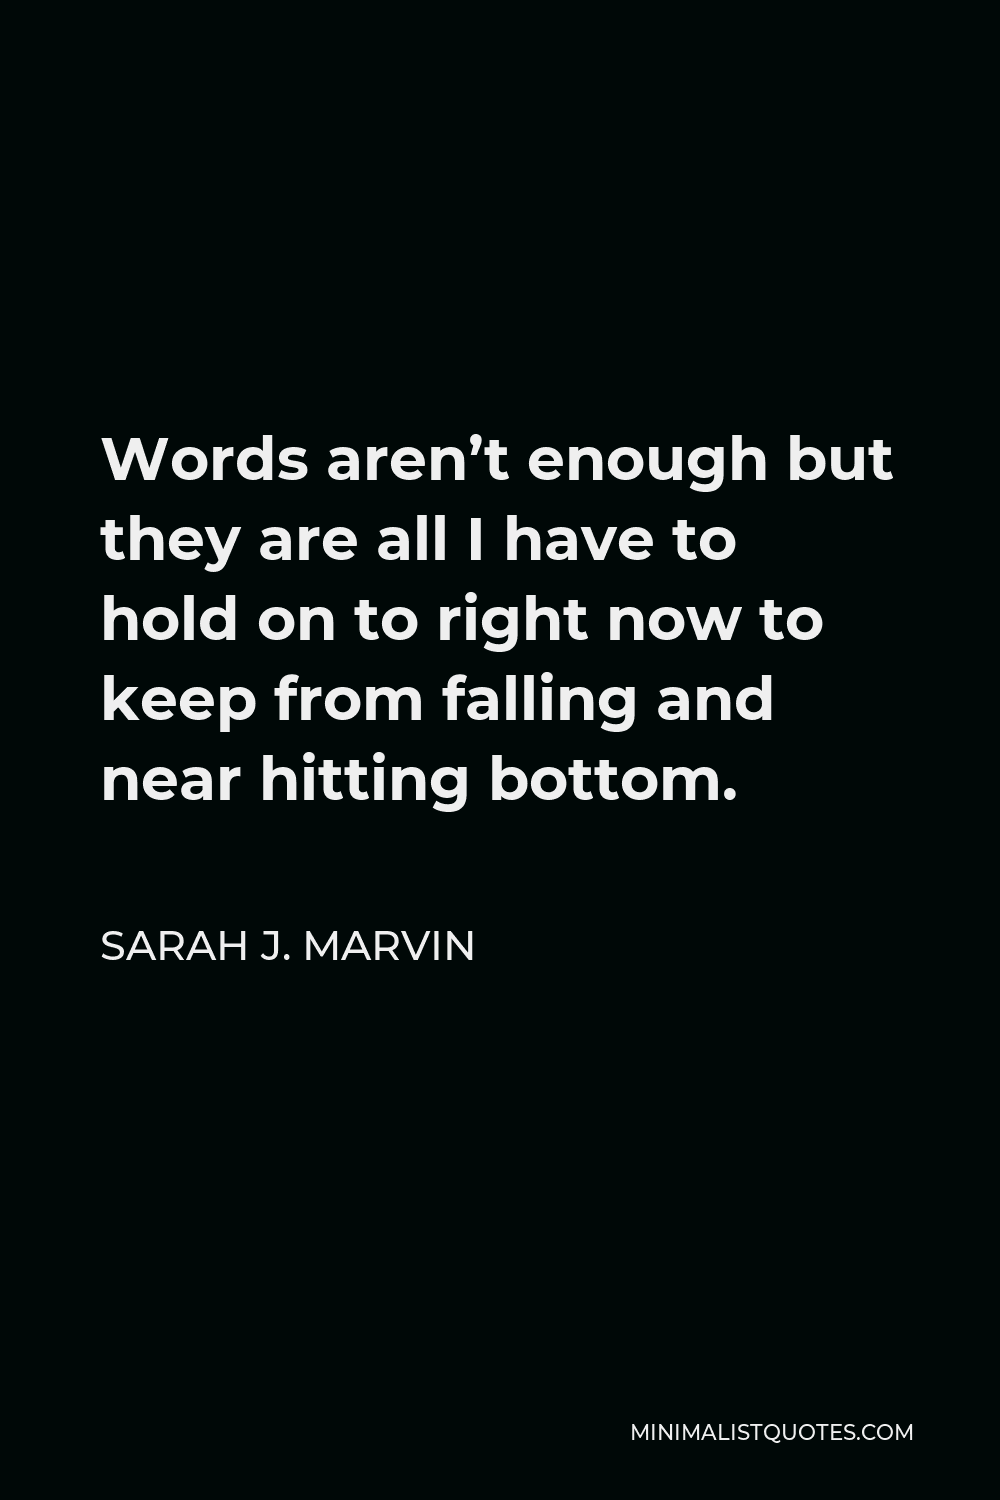 Sarah J. Marvin Quote - Words aren’t enough but they are all I have to hold on to right now to keep from falling and near hitting bottom.